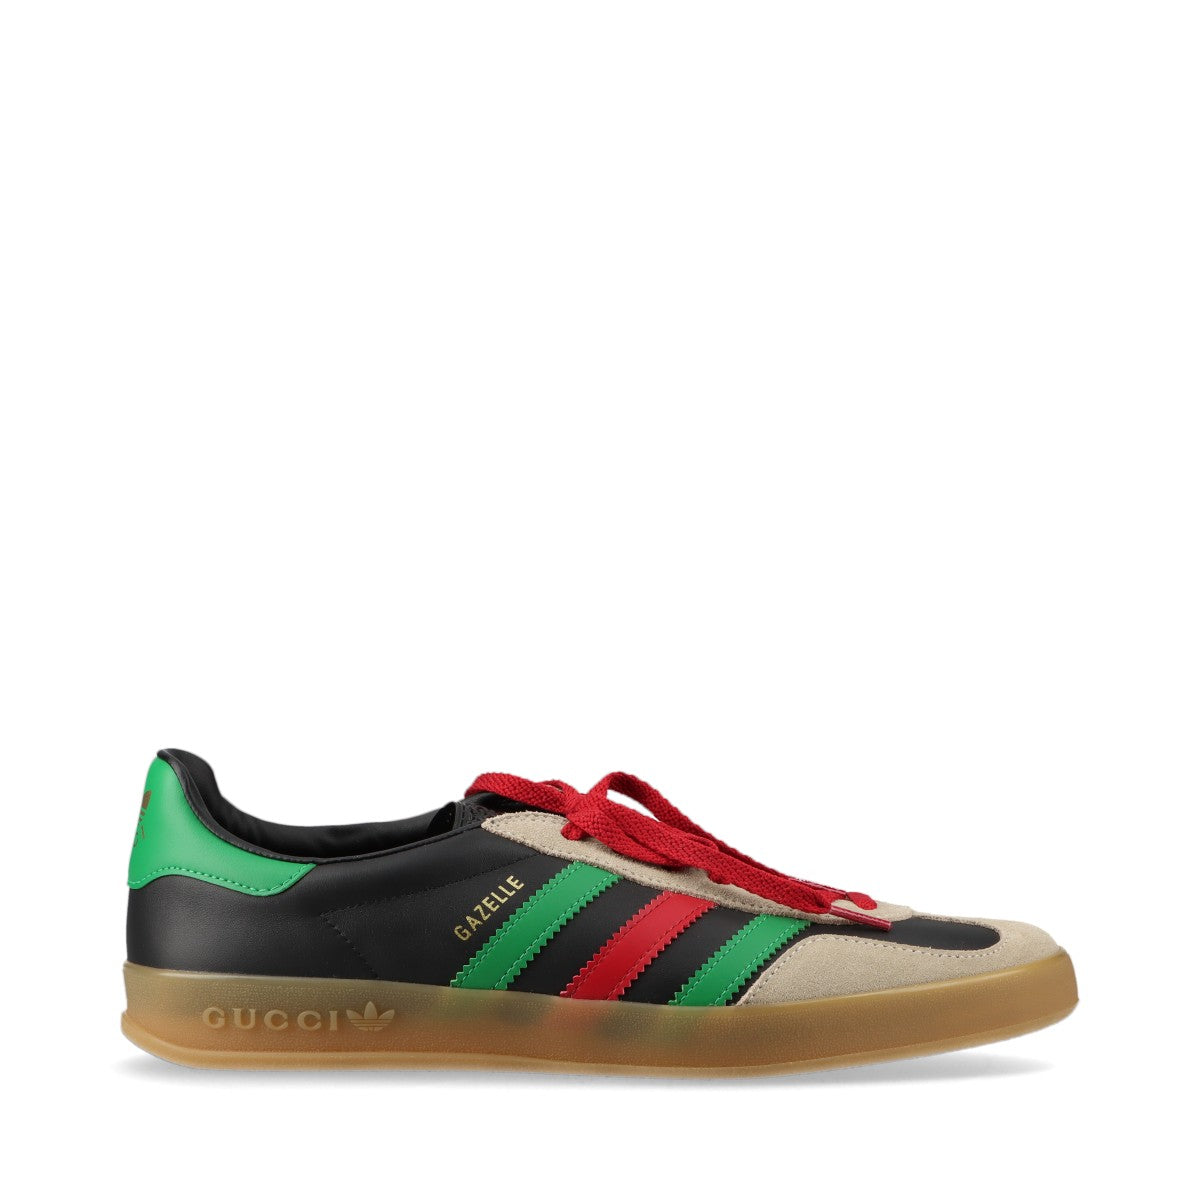 Gucci x Adidas Gazelle Leather & Suede Sneakers 28cm Men's Multicolor 726487 Replacement string Box There is a bag